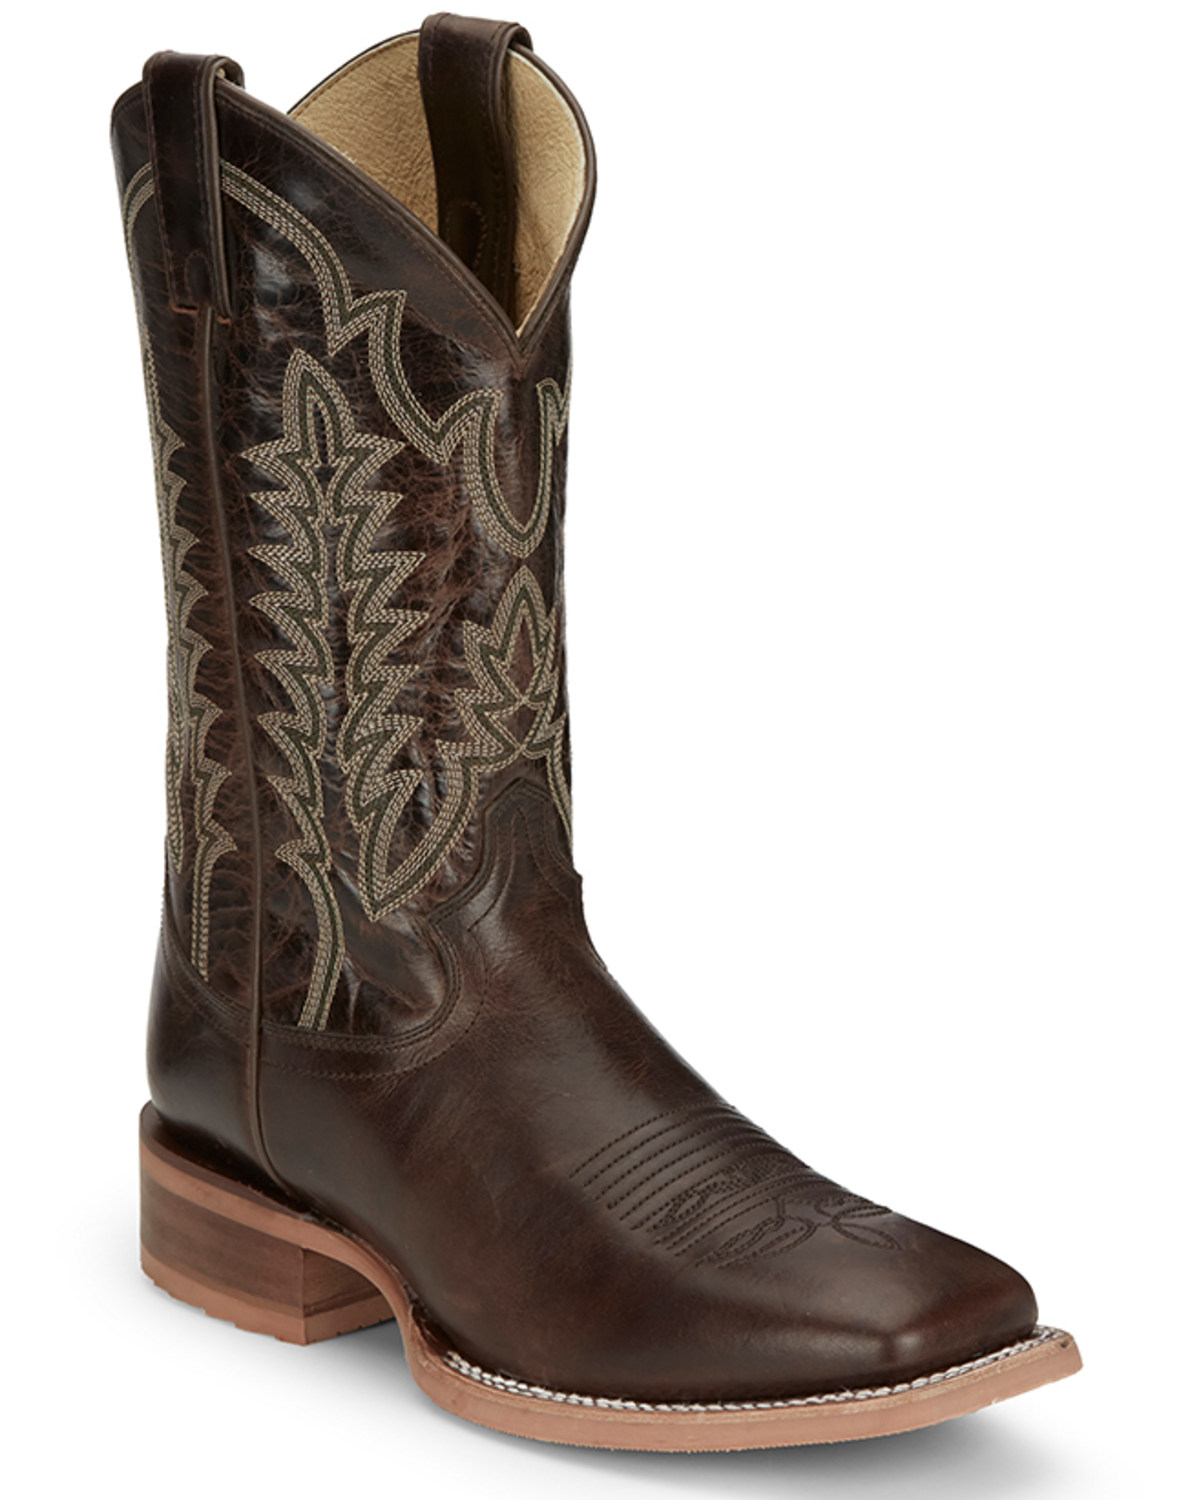 Justin Men's Lyle Umber Western Boots - Broad Square Toe